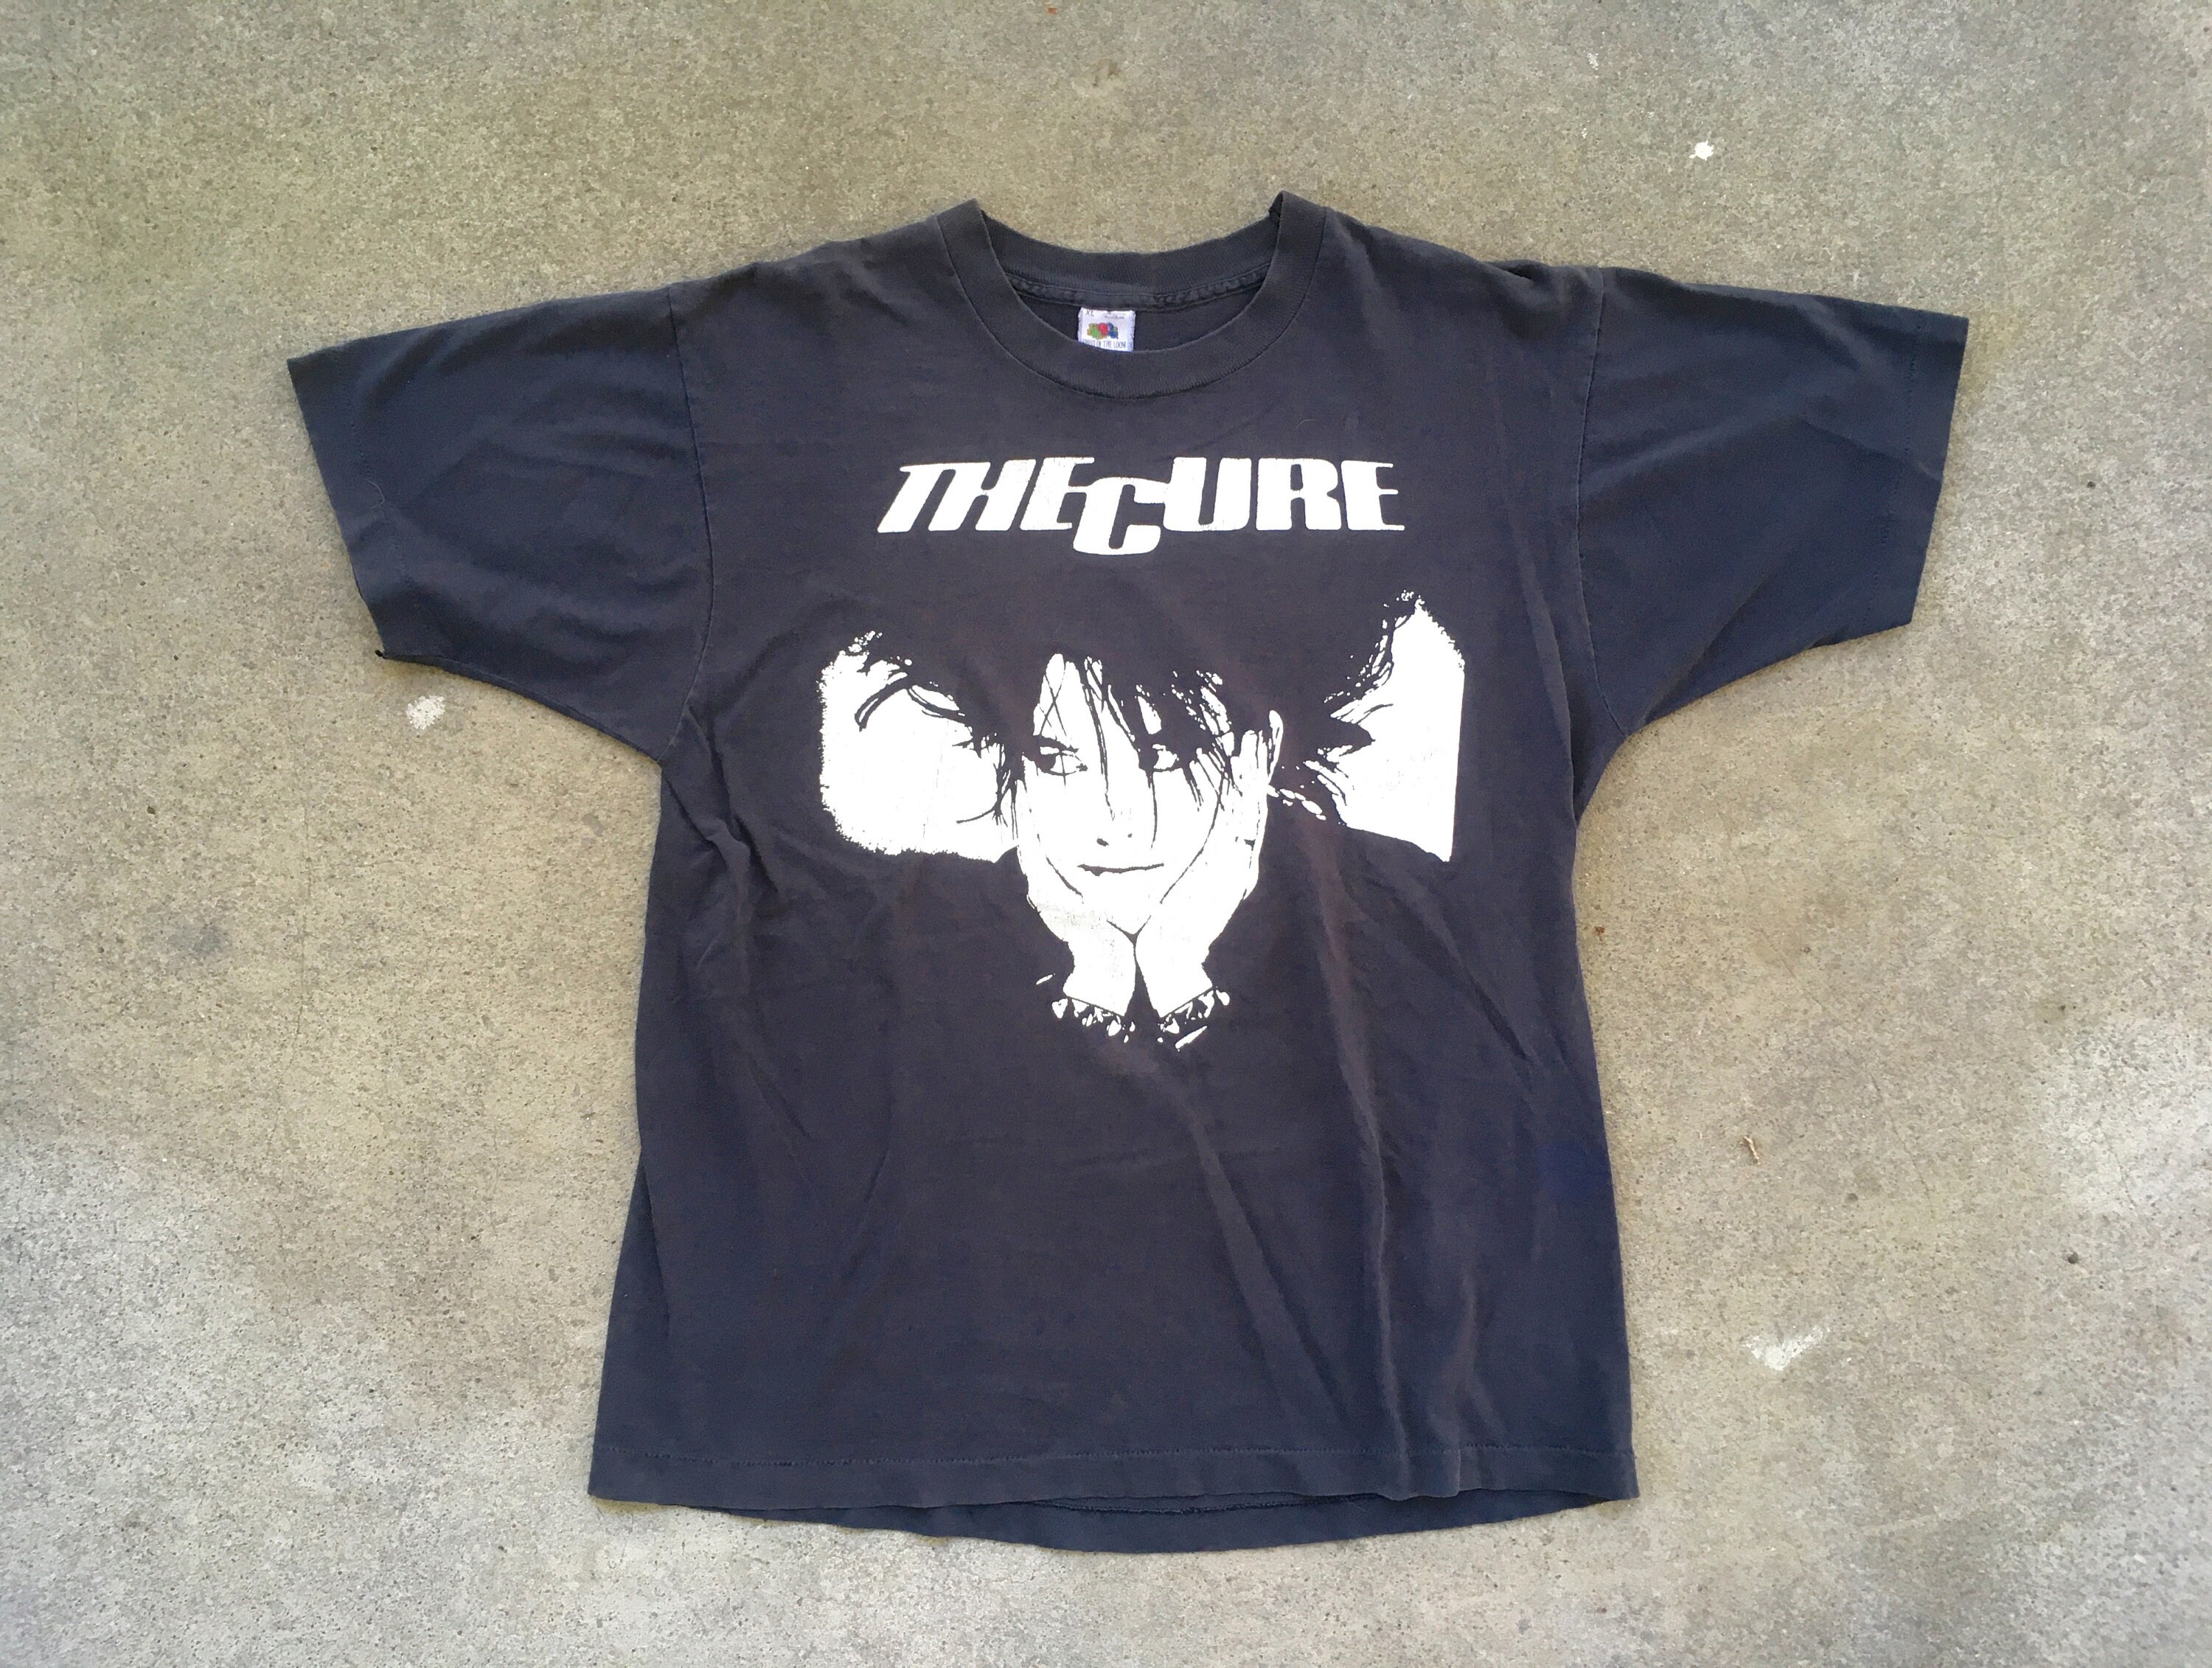 Vintage THE CURE Distressed Black T-SHIRT - Denmark